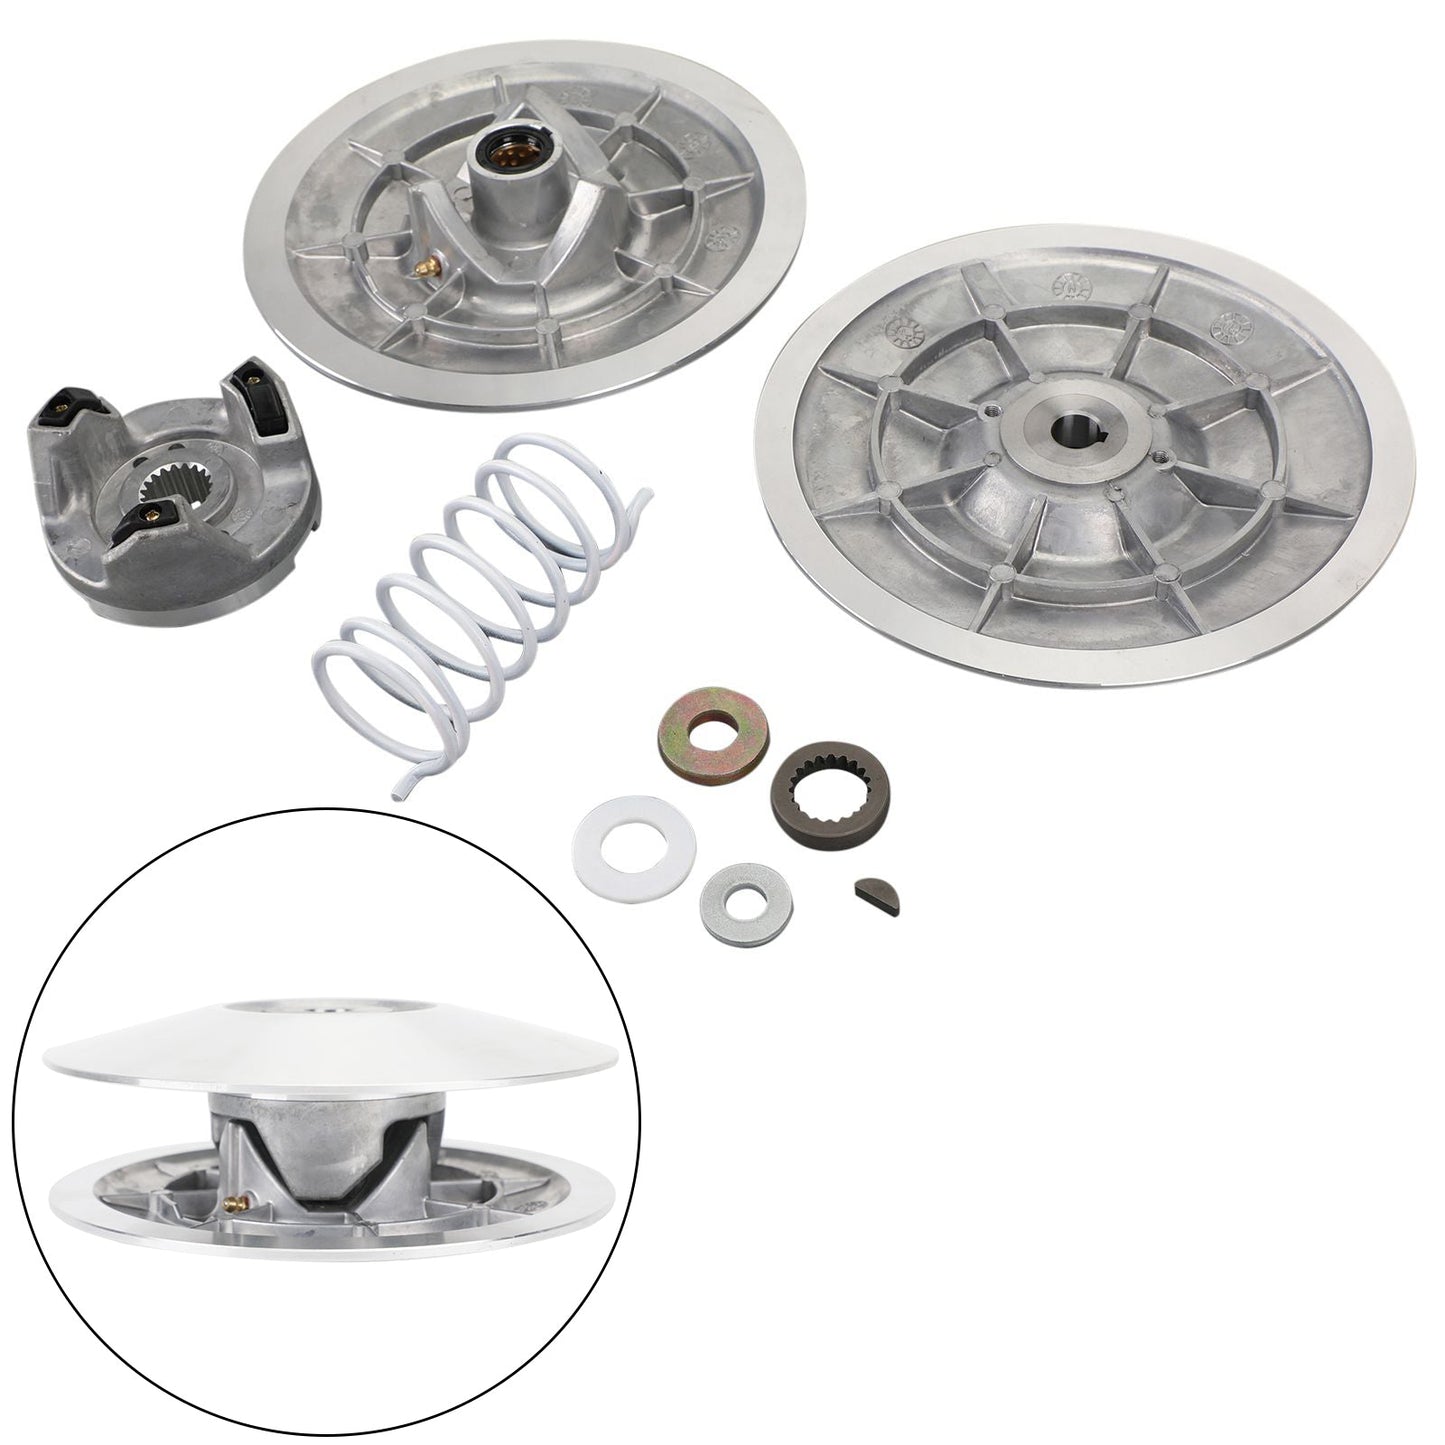 Secondary Driven Clutch Fit For Yamaha Golf Cart 4 Cycle G2 G9 G14 G16 G20 G22 1985-2007